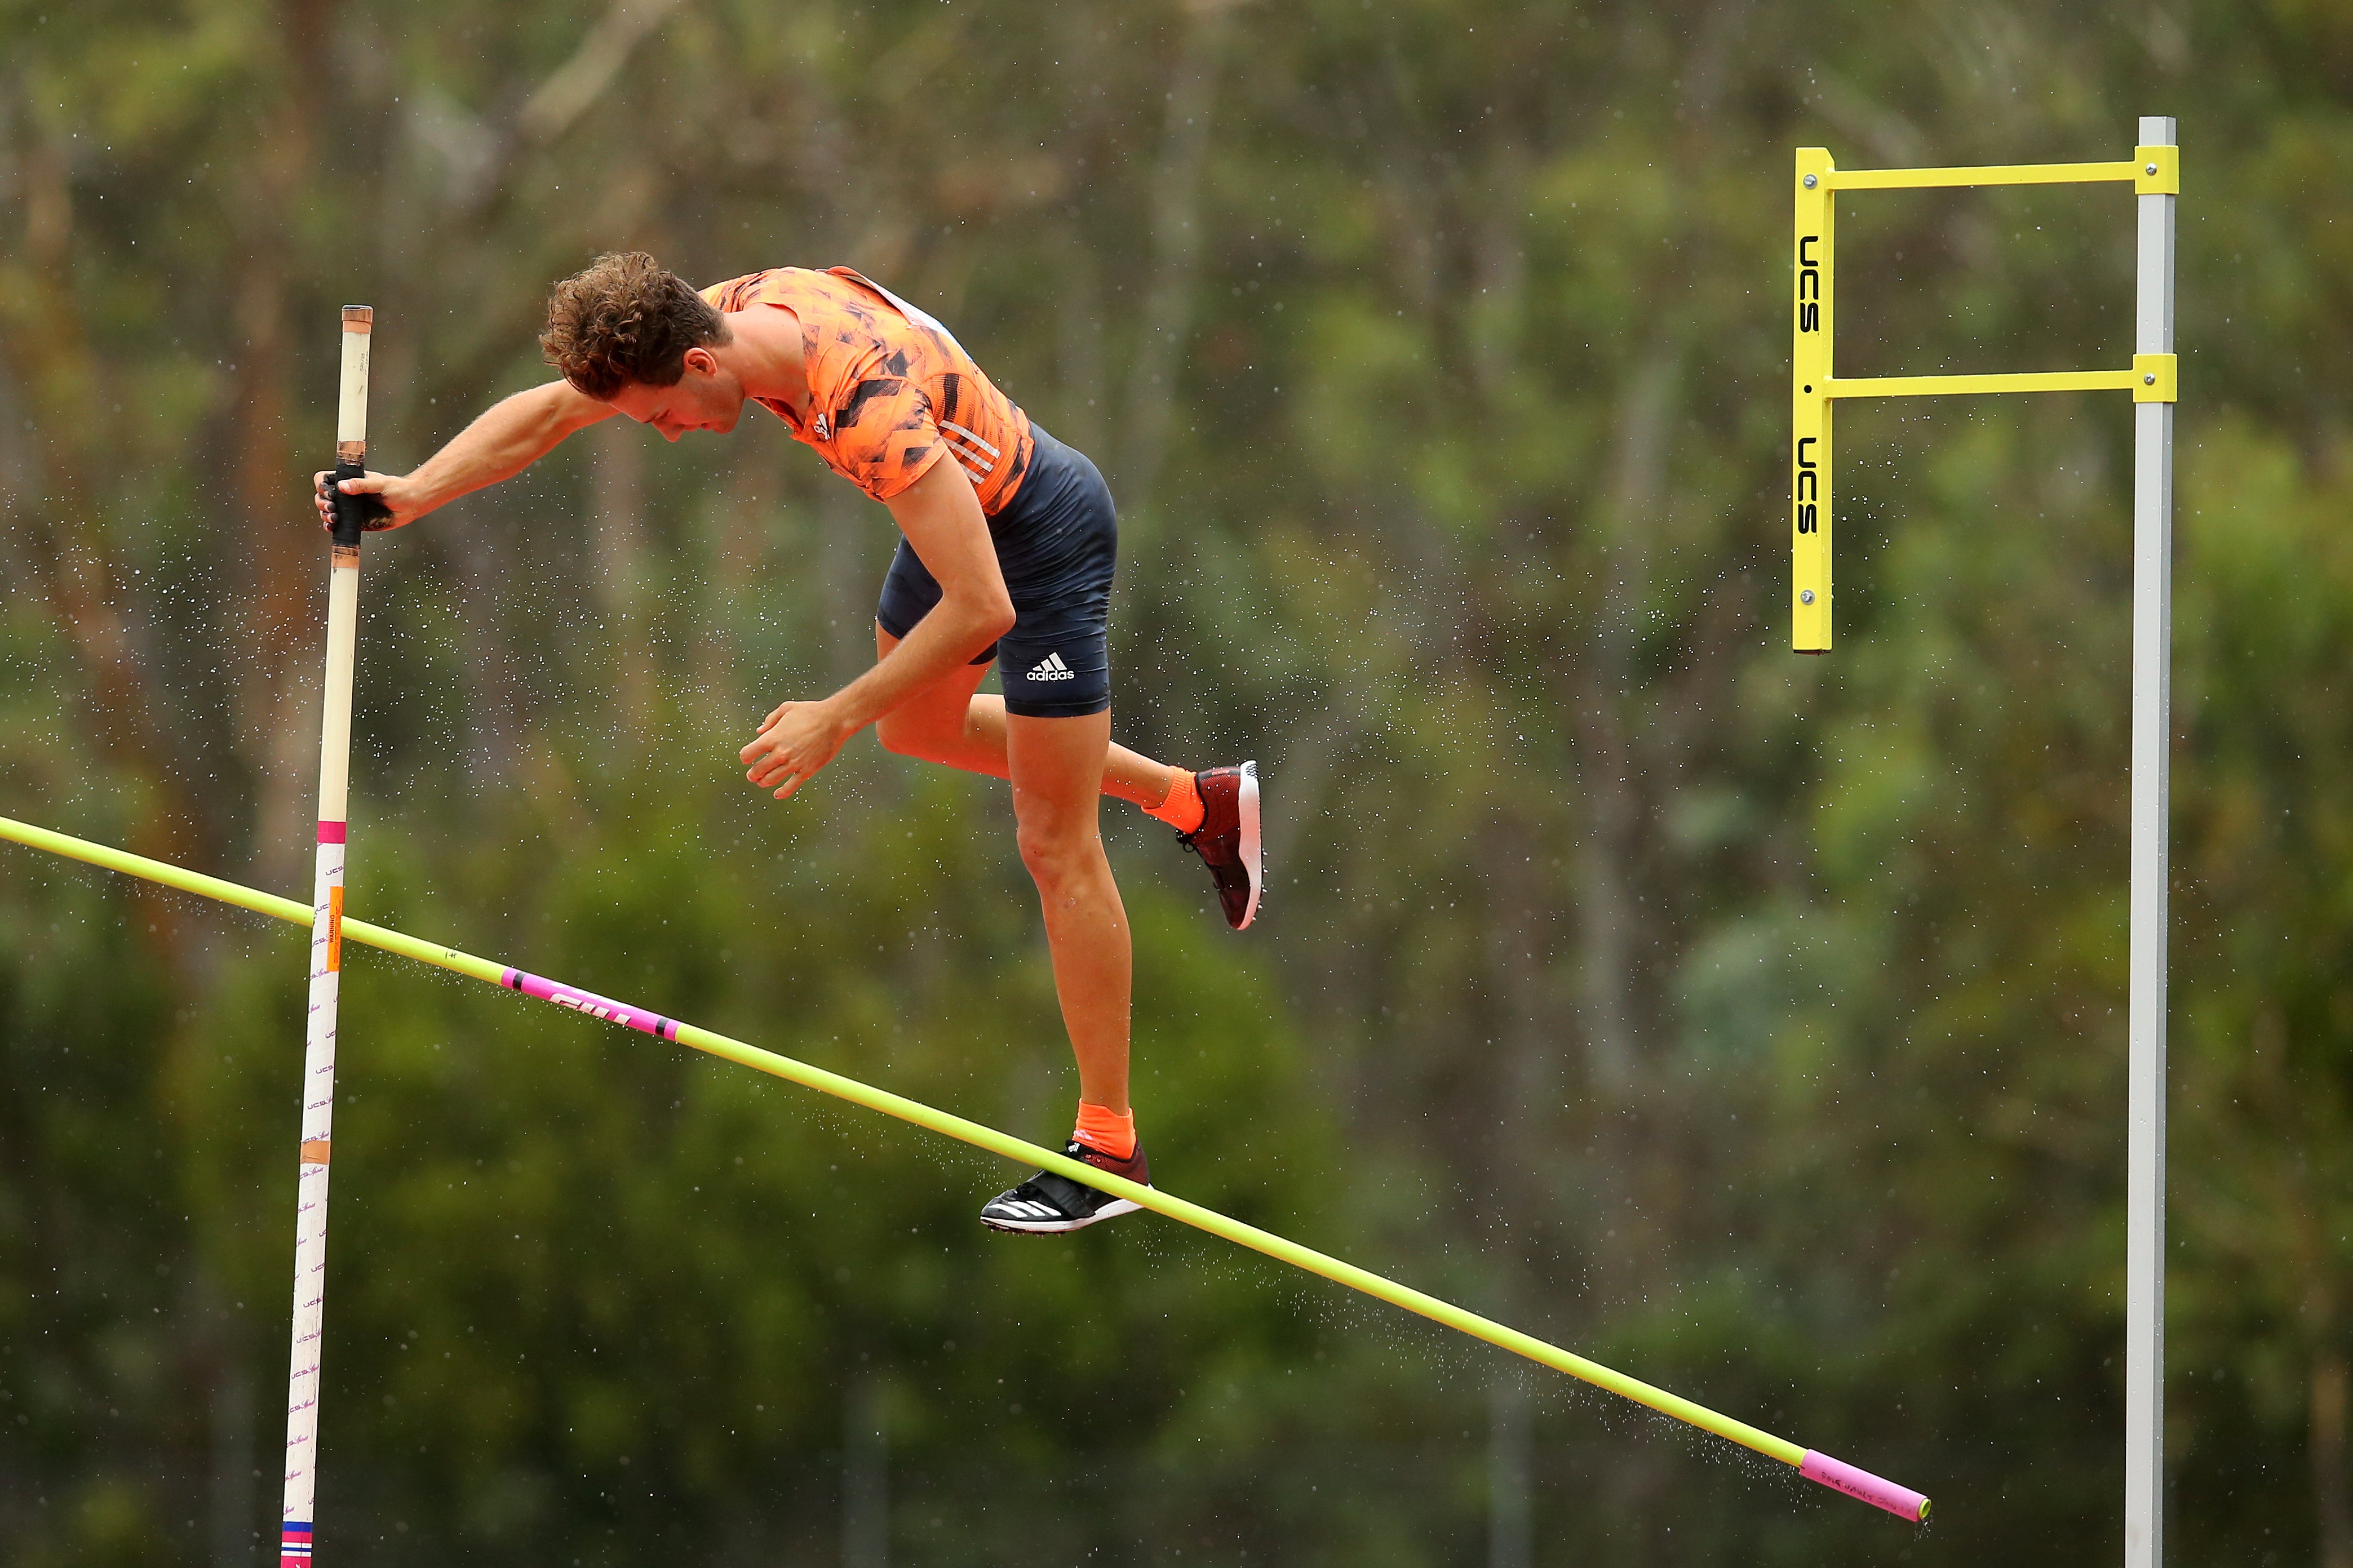 File: Australia’s Kurtis Marschall competes during the Canberra Festival of Athletics on 28 January, 2019